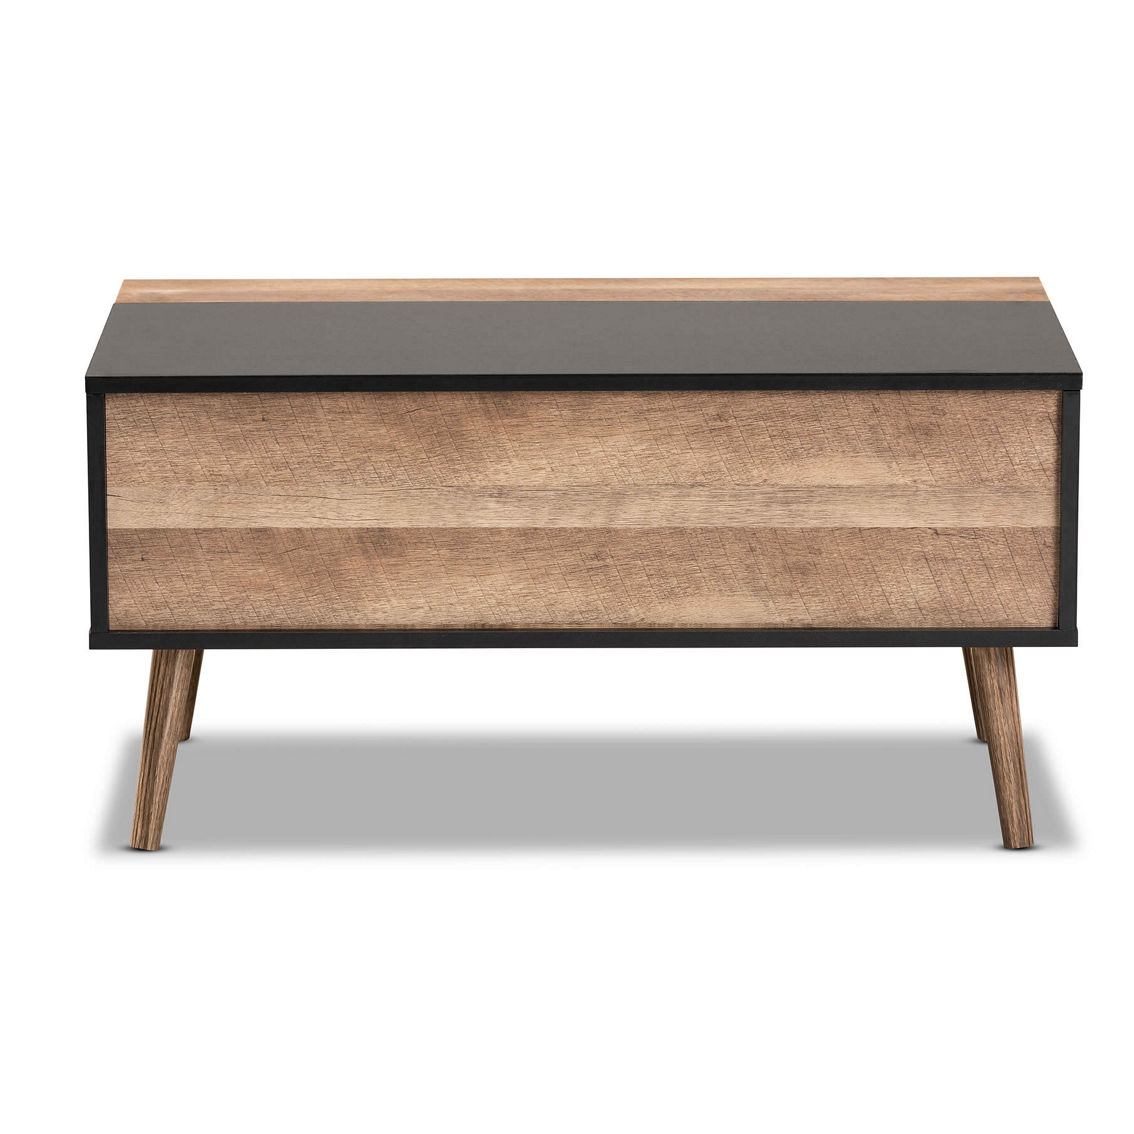 Baxton Studio Jensen Black and Brown Wood Lift Top Coffee Table with Storage - Image 3 of 5